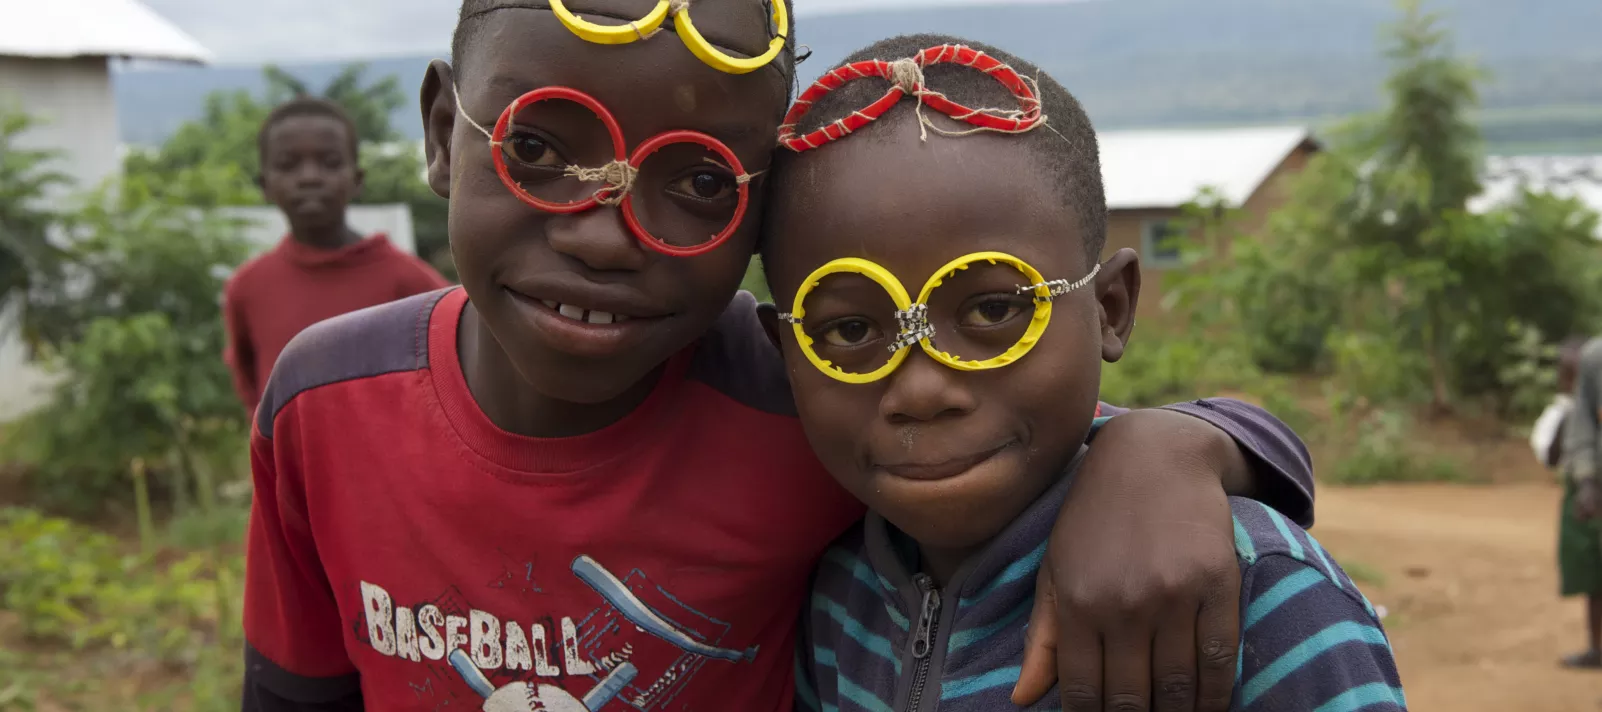 Two young boys smile at the camera wearing homemade glasses